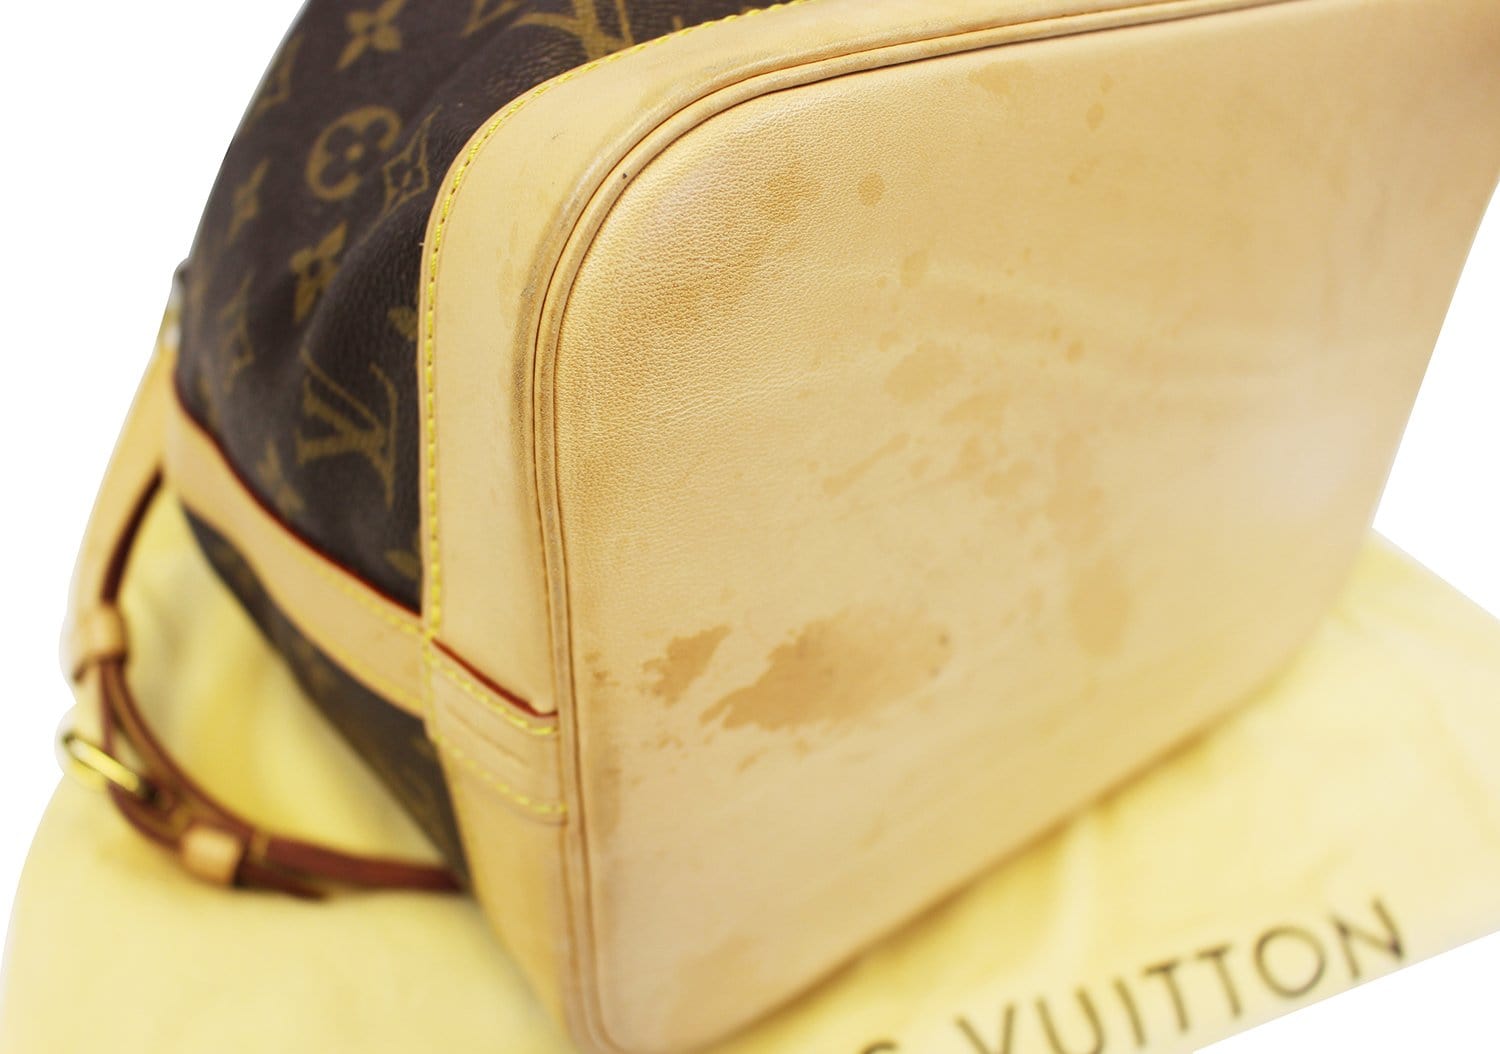 LOUIS VUITTON PETIT NOE - 1 Year Review & Update, Would I Still